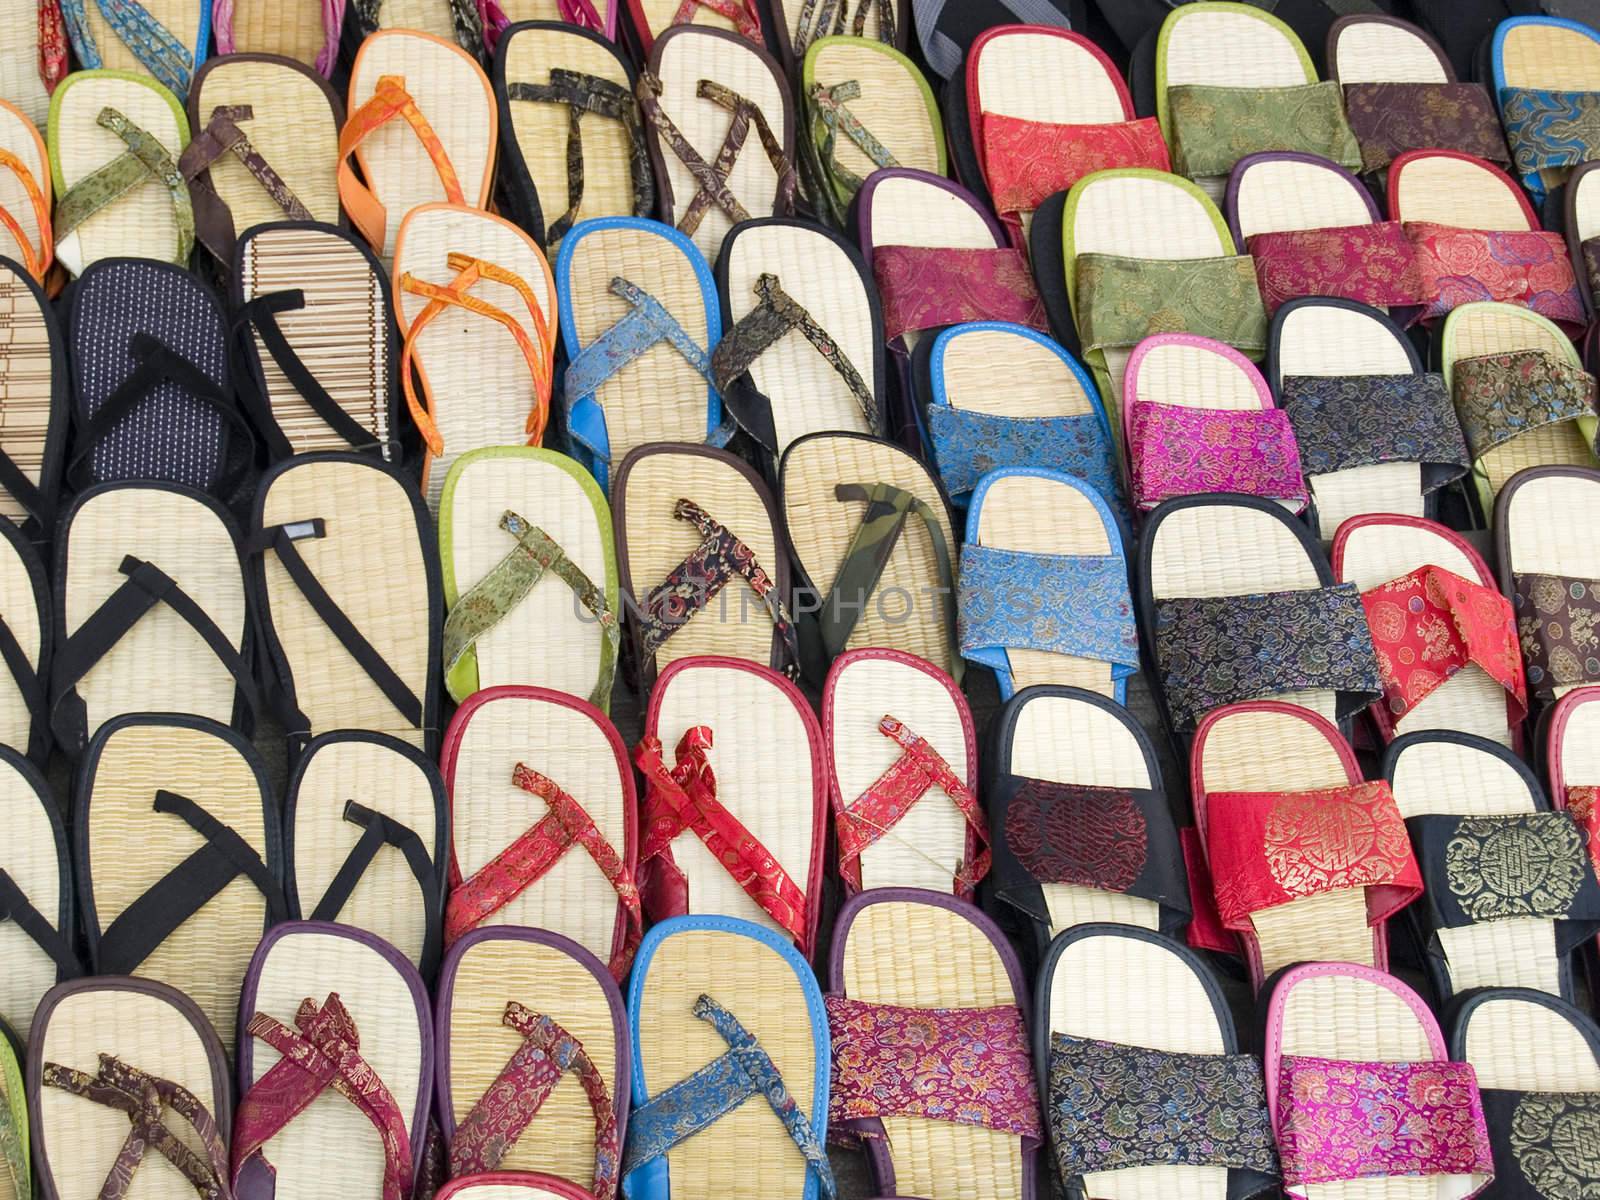 Lots of sandals in a market, many with Chinese style silk fabrics, all for the right foot.